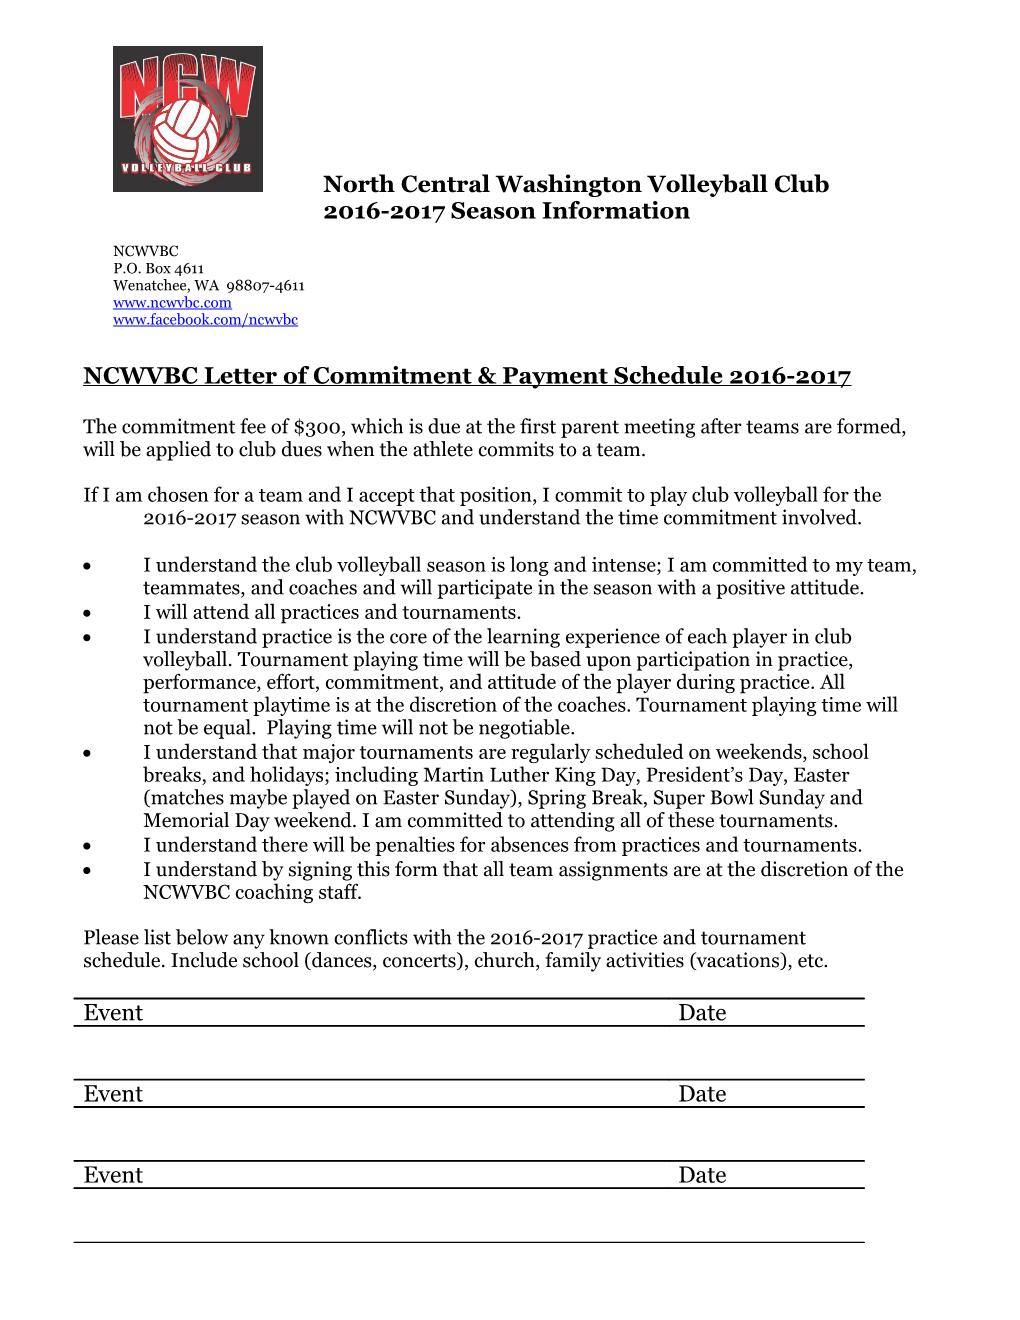 NCWVBC Letter of Commitment & Payment Schedule 2016-2017